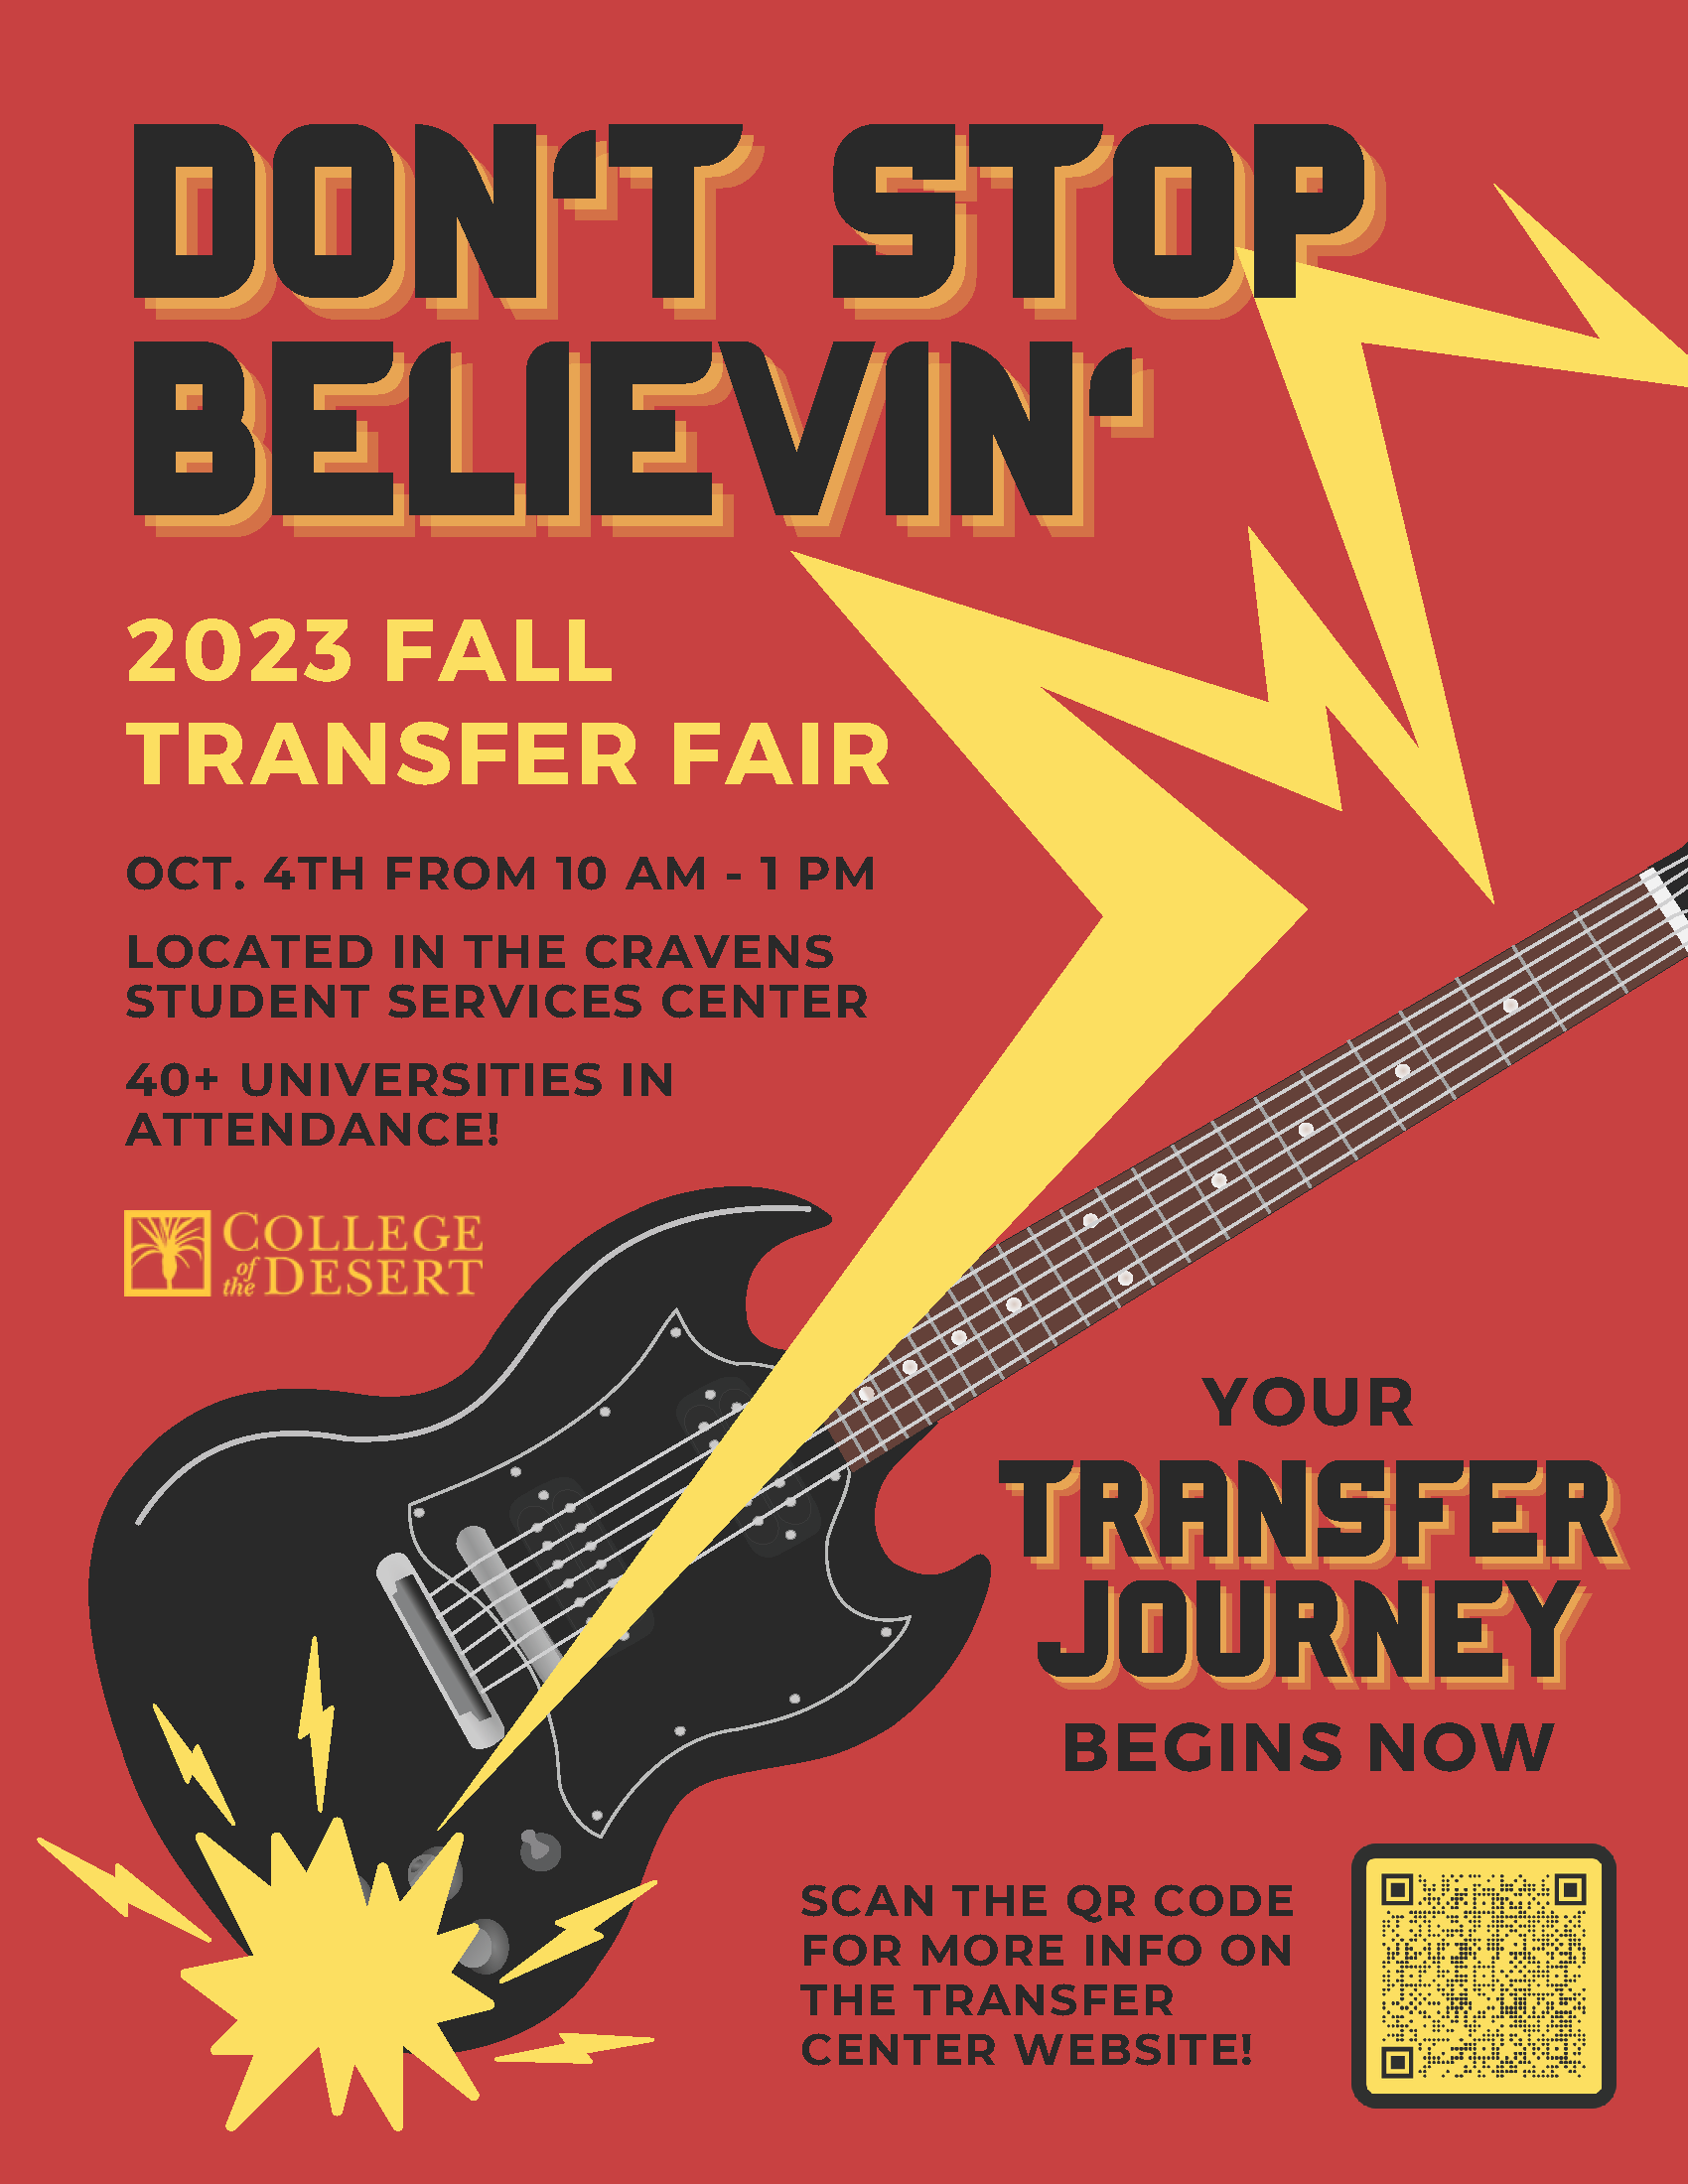 Don't Stop Believin' 2023 Fall Transfer Fair - Oct 4th from 10am to 1pm in the CSSC